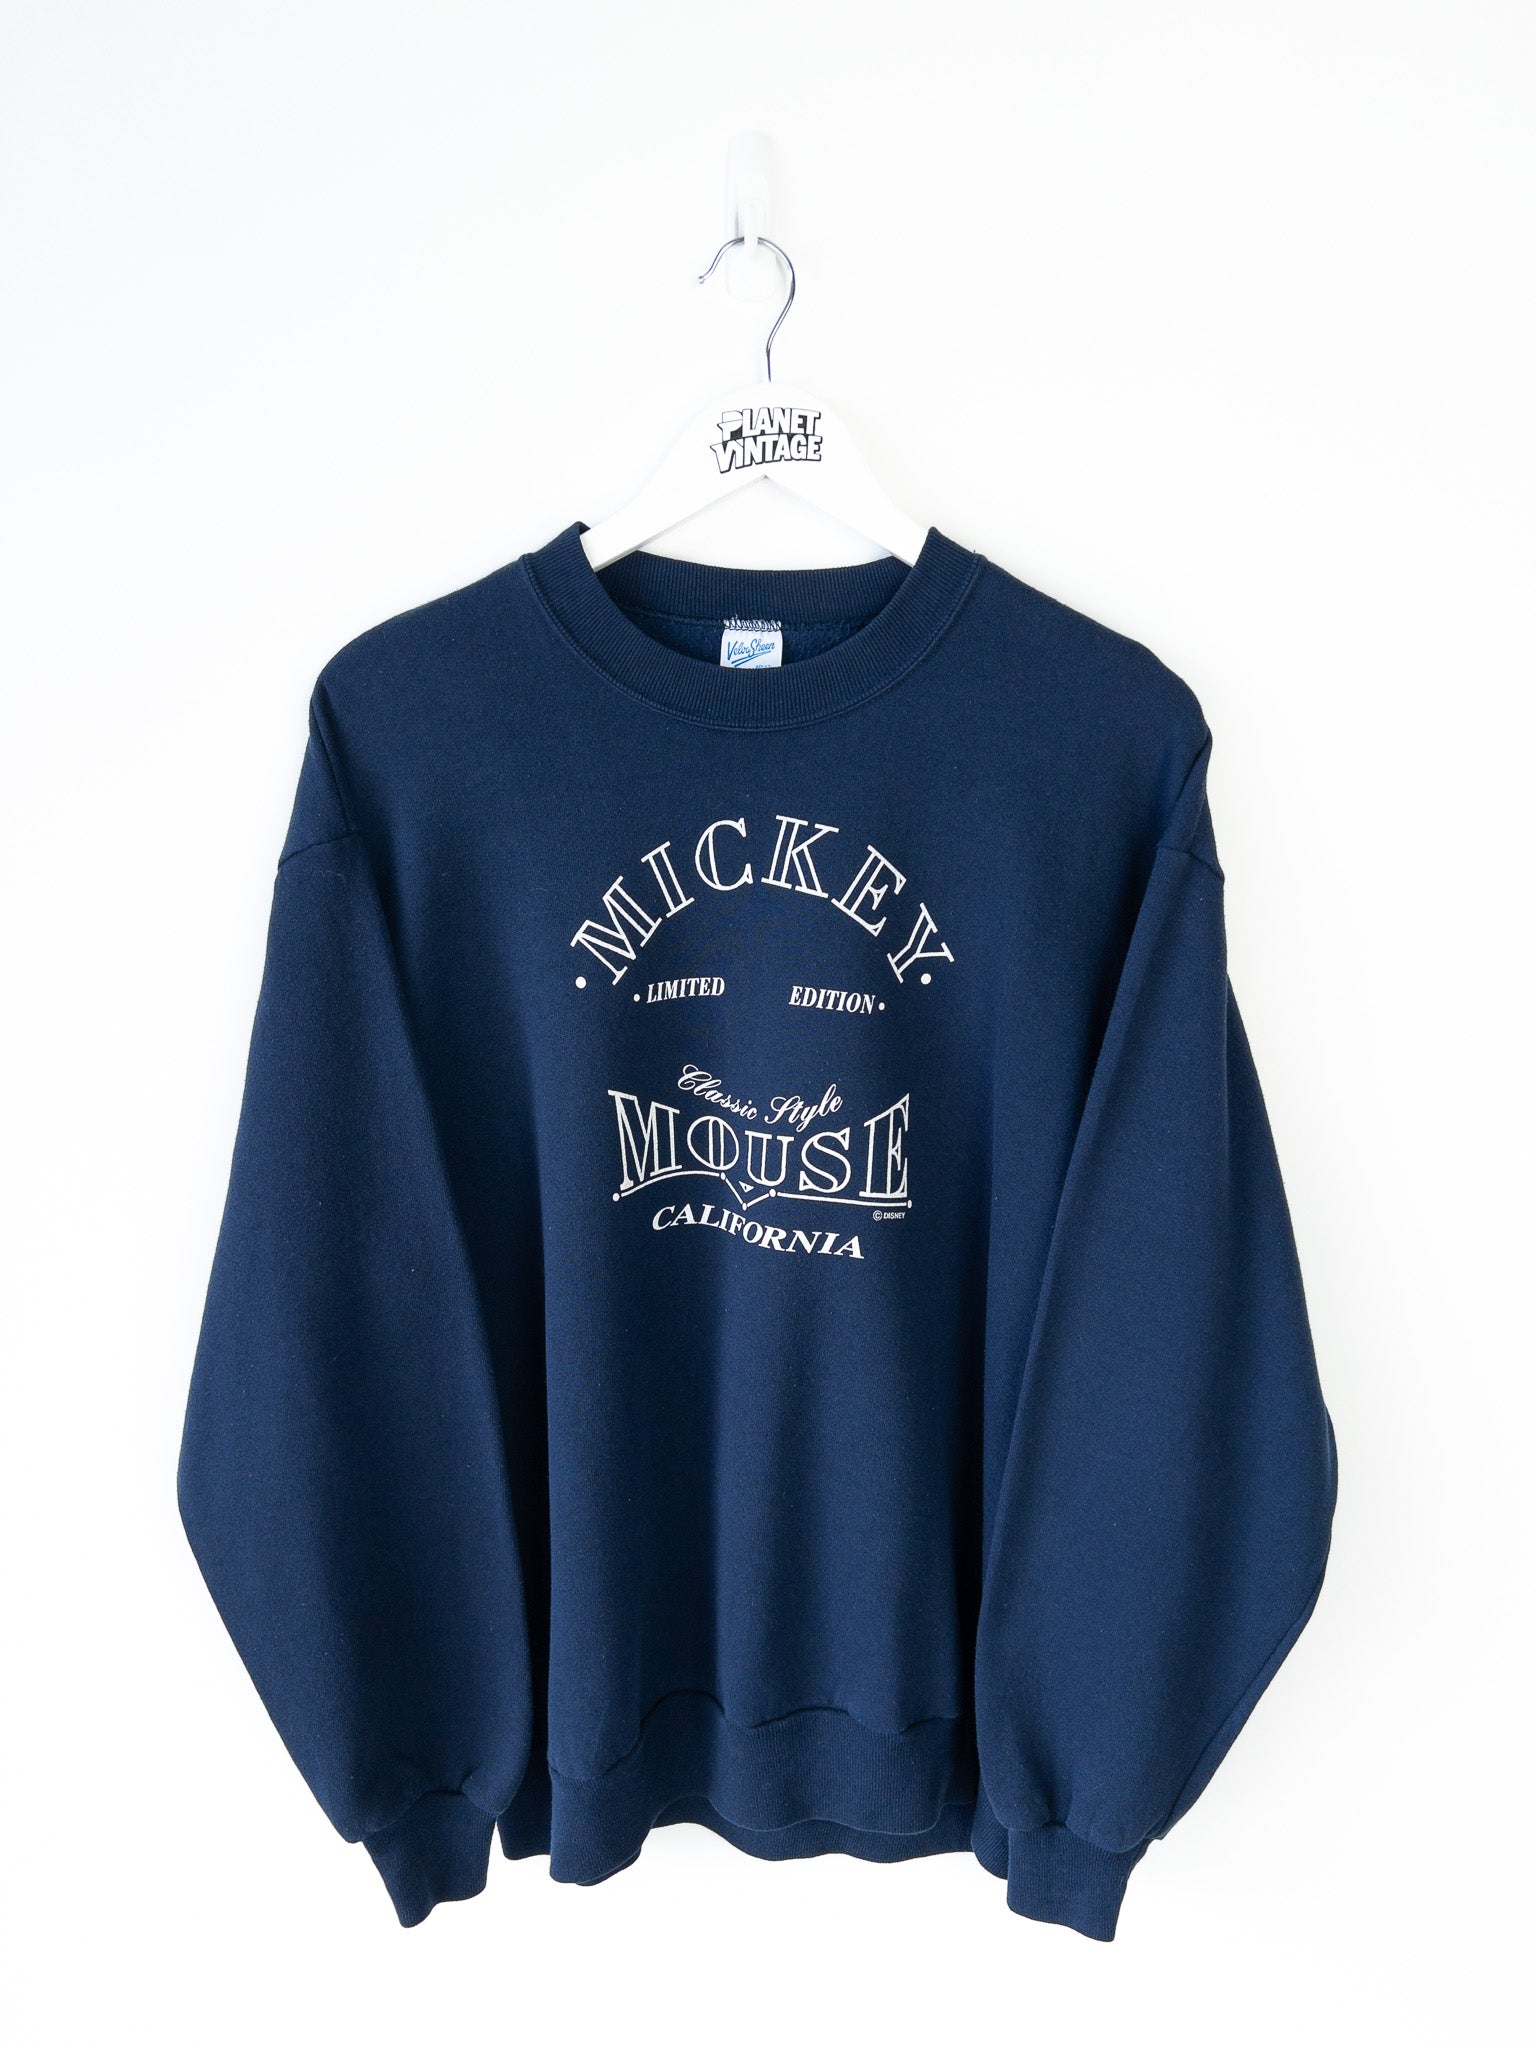 Vintage Mickey Mouse Classic Style '90s Sweatshirt (M)